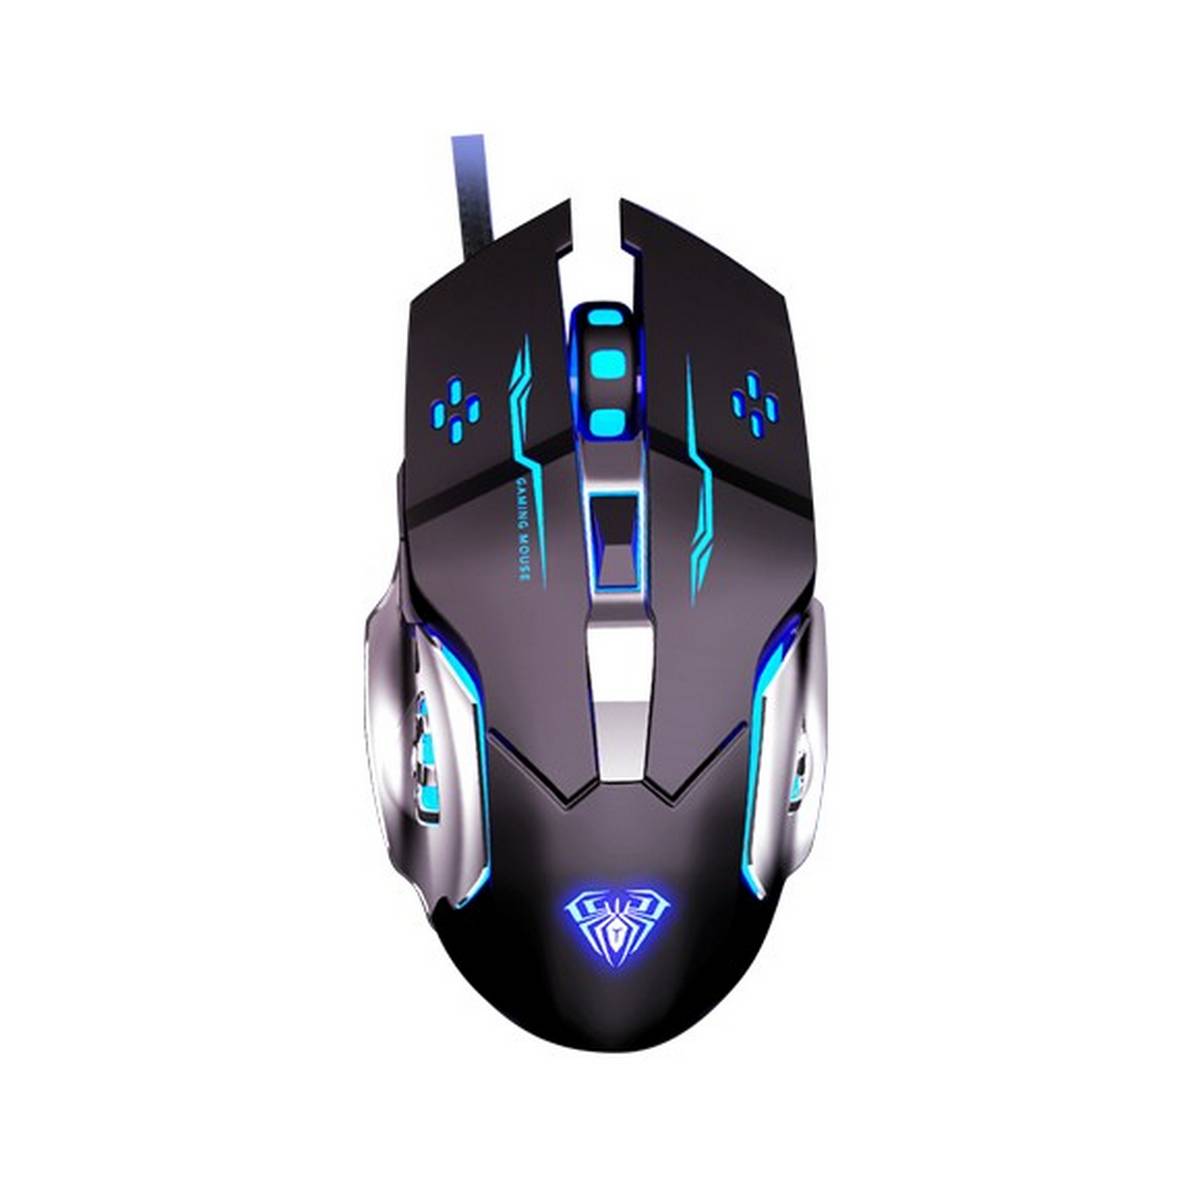 Aula gaming mouse button layout - falaseffect